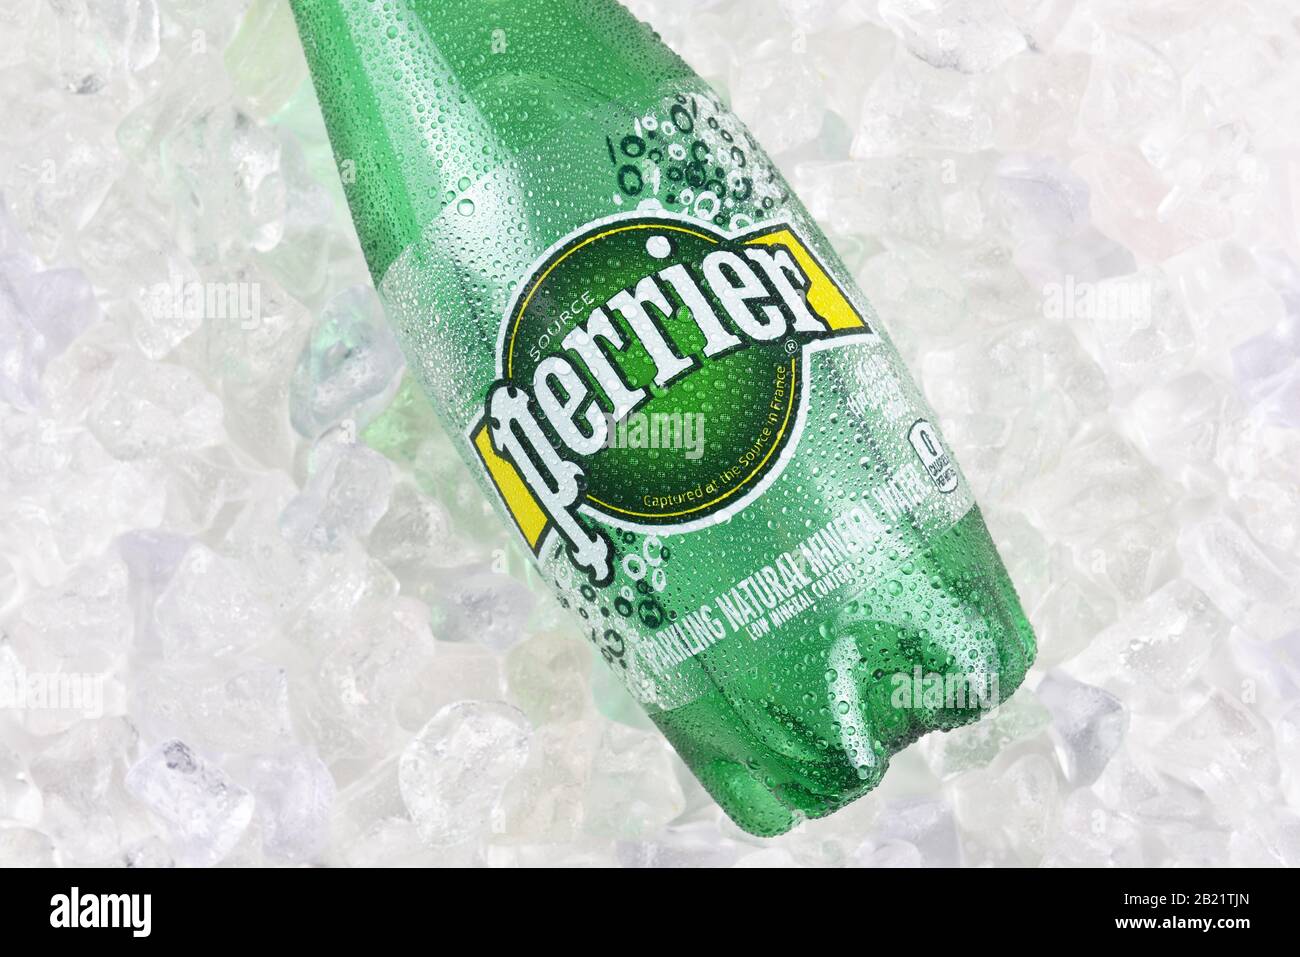 IRVINE, CALIFORNIA - DECEMBER 17, 2017: Perrier Sparkling Mineral Water on ice closeup. The spring, in Vergeze, France, where the water is sourced is Stock Photo